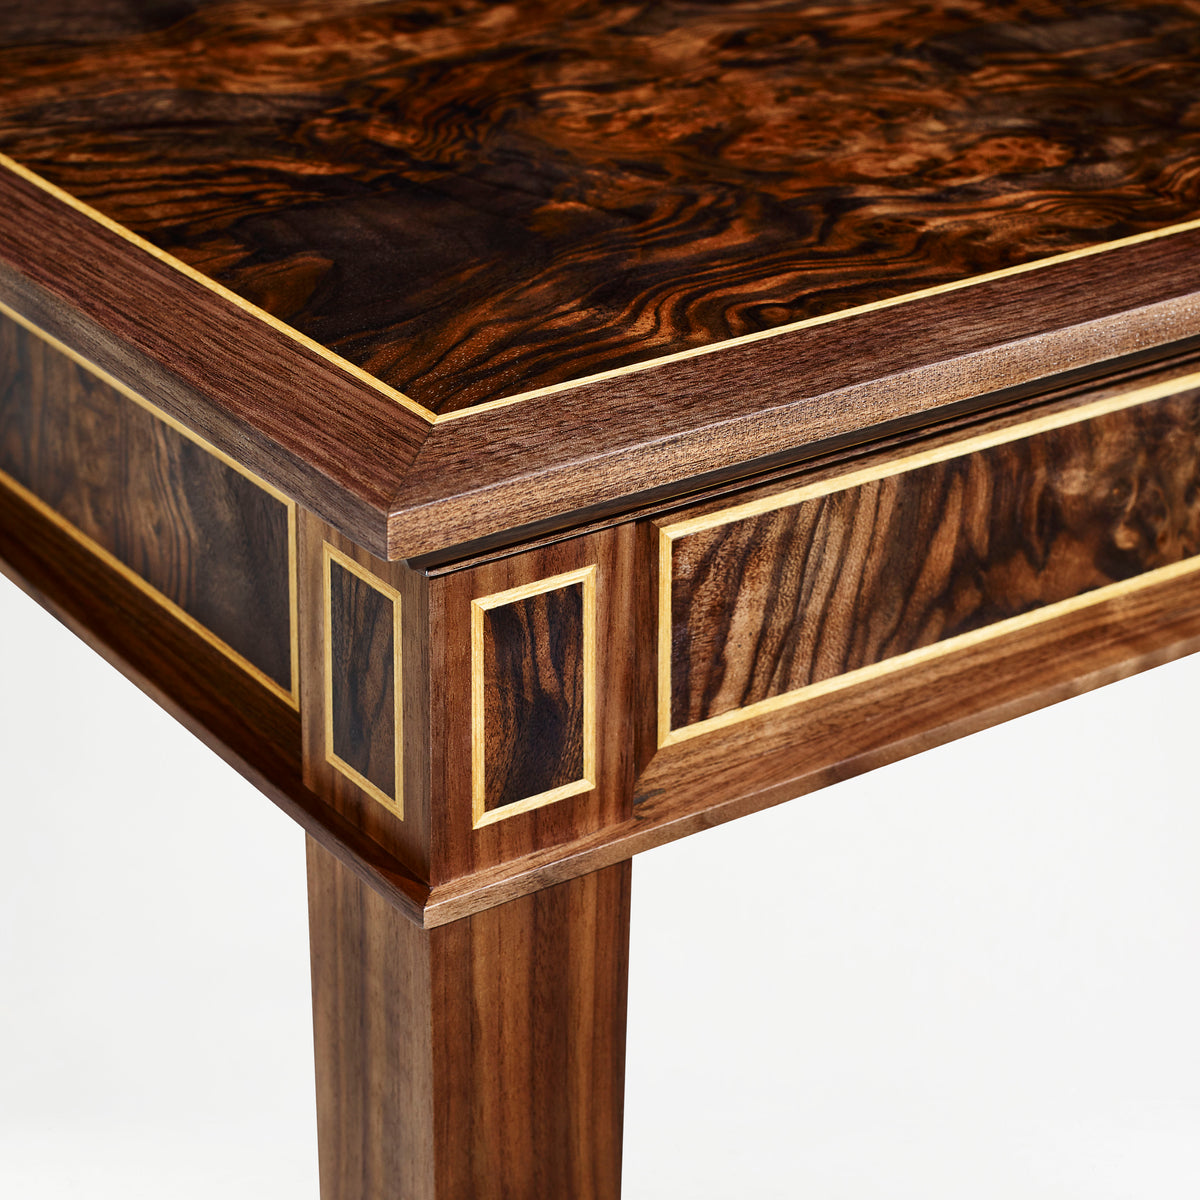 LINLEY Classic Console Table | Bespoke Design & Luxury Furniture | LINLEY